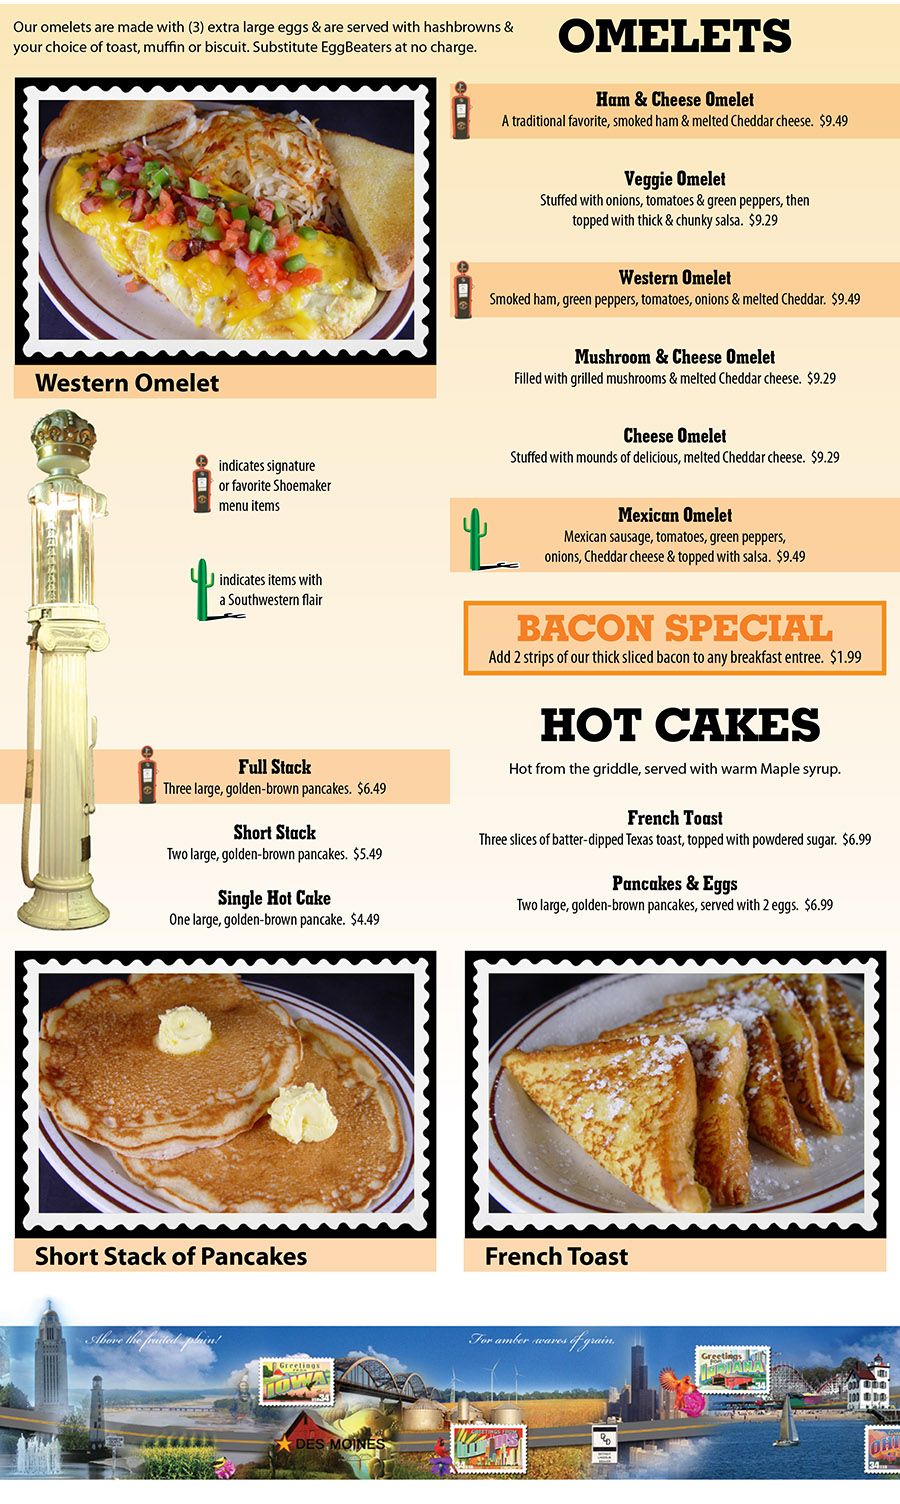 Shoemakers Travel Center Menu - Lincoln Nebraska
OMELETS
Our omelets are made with (3) extra large eggs & are served with hashbrowns &
your choice of toast,
muffin or biscuit. Substitute EggBeaters at no charge.
Ham & Cheese Omelet
A traditional favorite, smoked ham & melted Cheddar cheese.  $9.49
Veggie Omelet
Stuffed with onions, tomatoes & green peppers, then
topped with thick & chunky salsa.  $9.29
Western Omelet
Smoked ham, green peppers, tomatoes, onions & melted Cheddar.  $9.49
Mushroom & Cheese Omelet
Filled with grilled mushrooms & melted Cheddar cheese.  $9.29
Cheese Omelet
Stuffed with mounds of delicious, melted Cheddar cheese.  $9.29
Mexican Omelet
Mexican sausage, tomatoes, green peppers,
onions, Cheddar cheese & topped with salsa.  $9.49
BACON SPECIAL
Add 2 strips of our thick sliced bacon to any breakfast entree.  $1.99
HOT CAKES
Hot from the griddle, served with warm Maple syrup.
Full Stack
Three large, golden-brown pancakes.  $6.49
Short Stack
Two large, golden-brown pancakes.  $5.49
Single Hot Cake
One large, golden-brown pancake.  $4.49
French Toast
Three slices of batter-dipped Texas toast, topped with powdered sugar.  $6.99
Pancakes & Eggs
Two large, golden-brown pancakes, served with 2 eggs.  $6.99